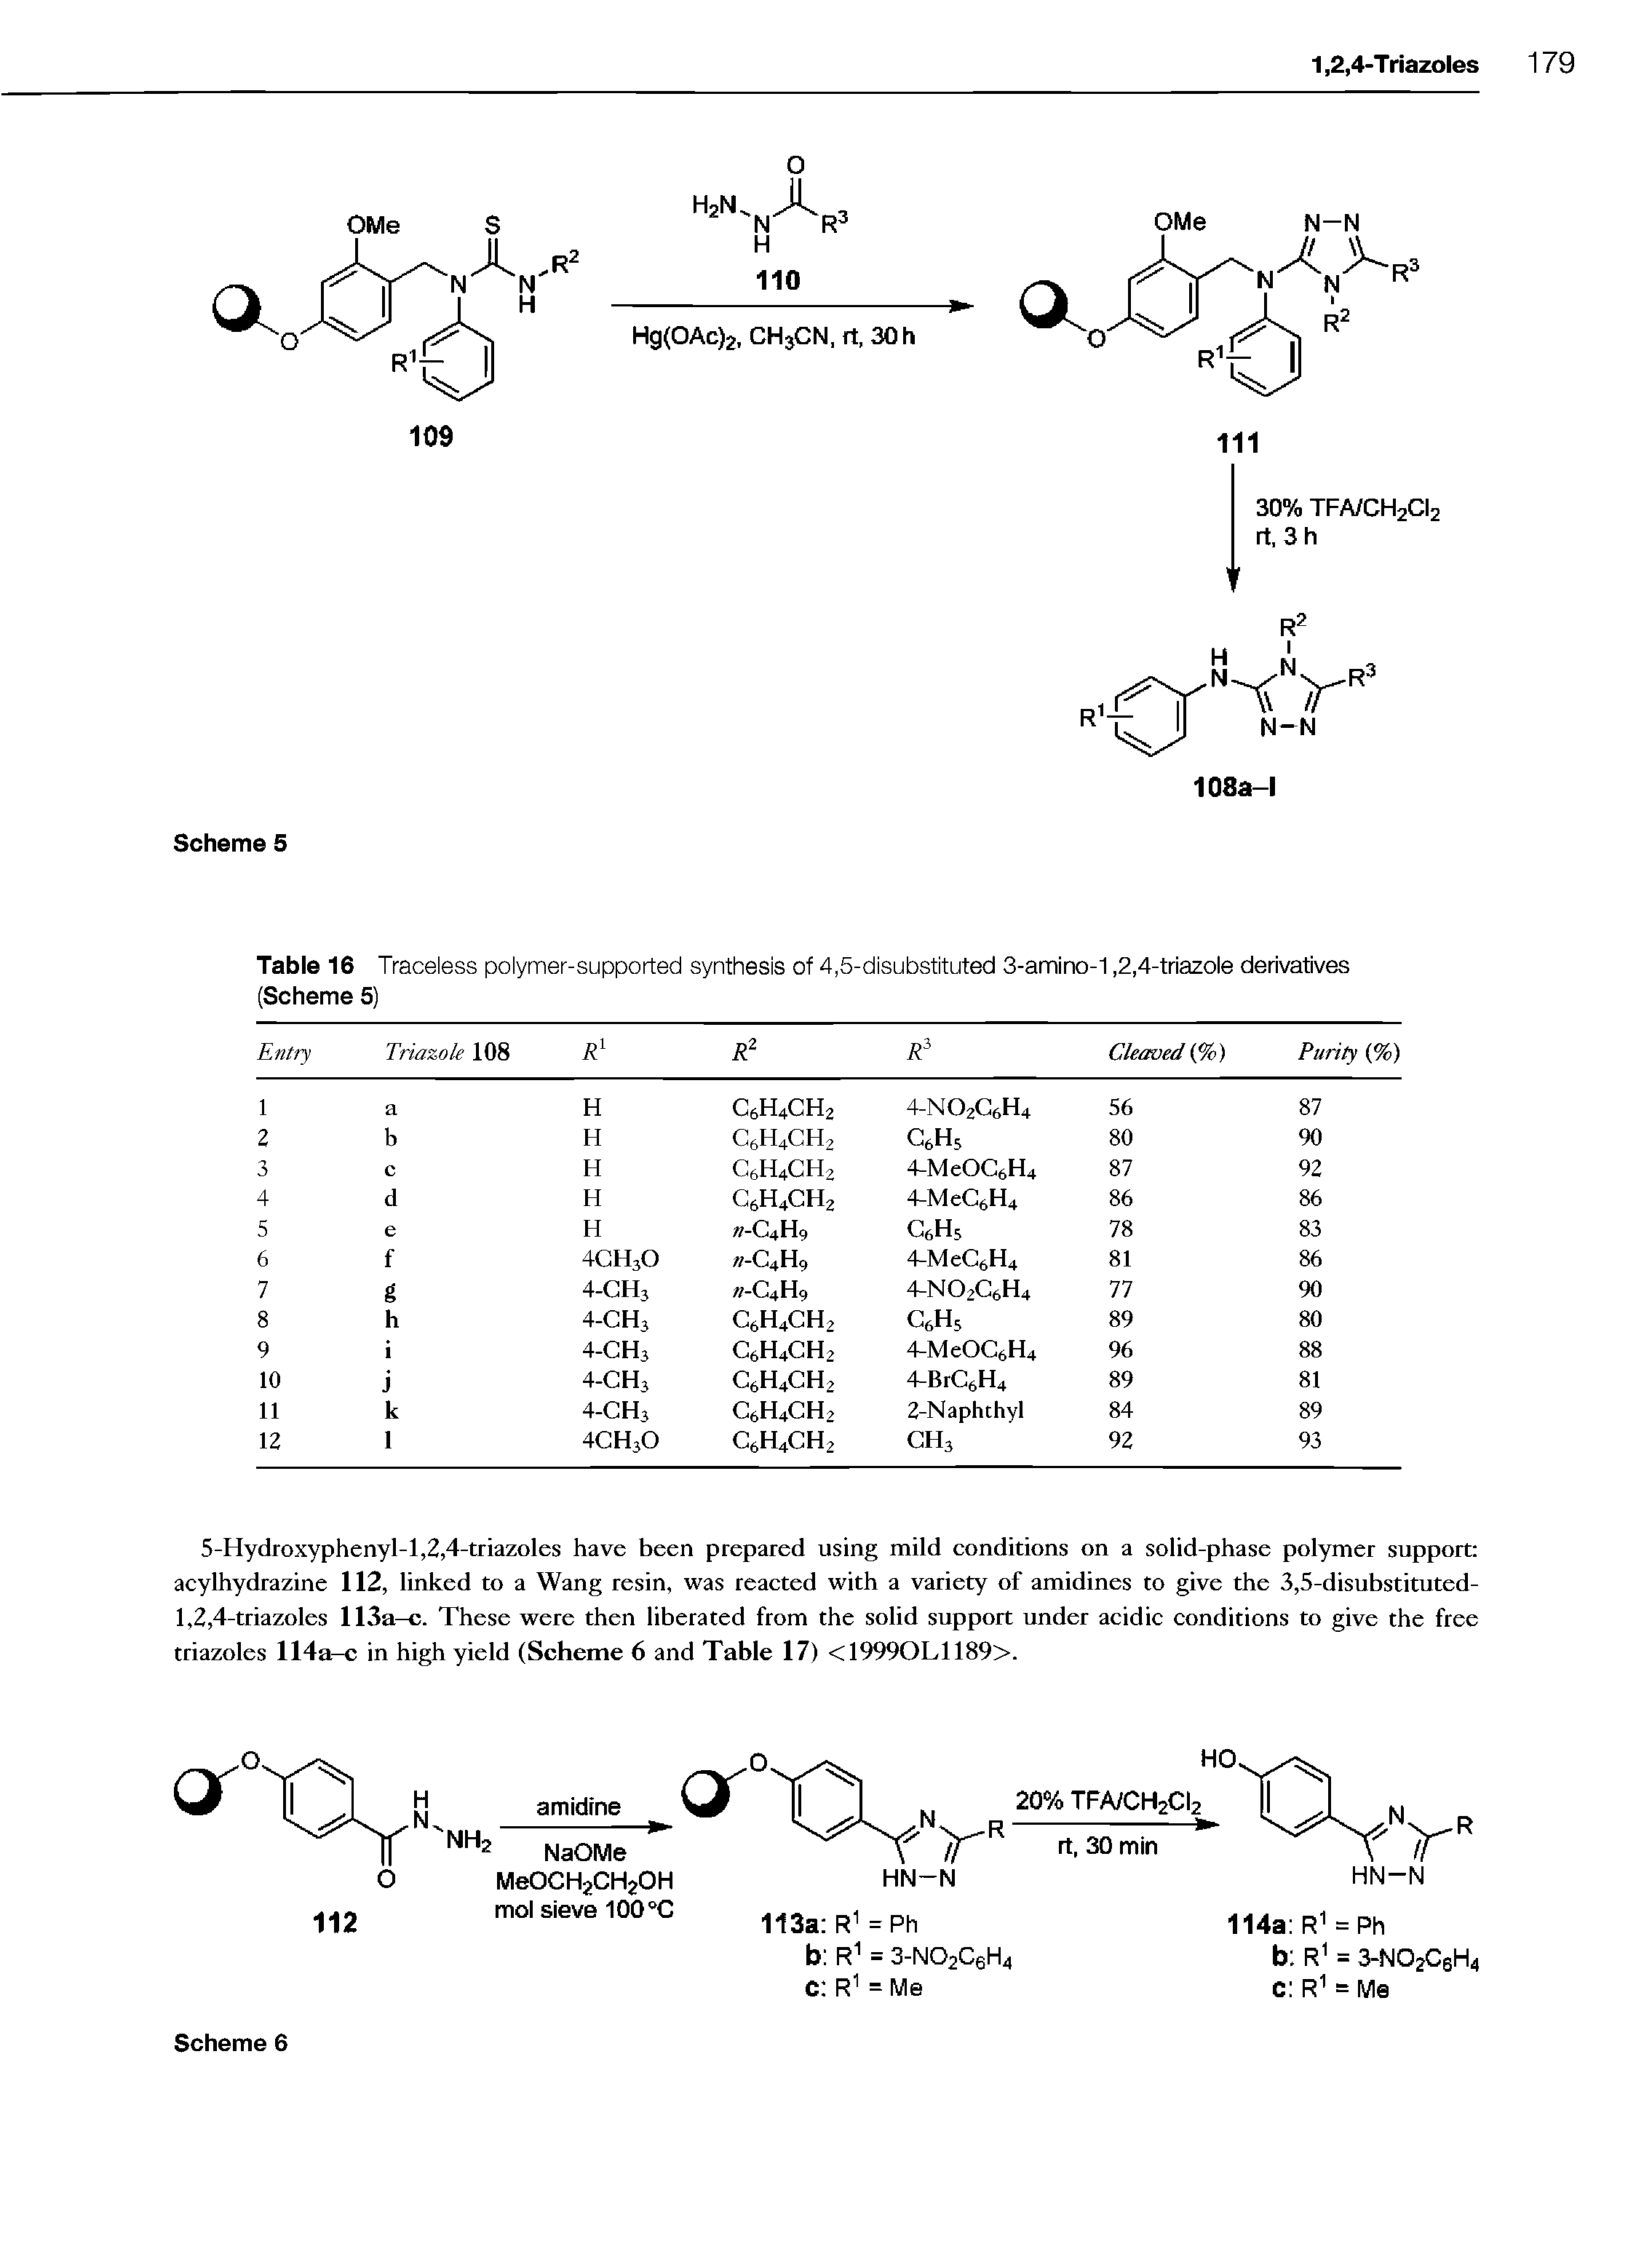 Table 16 Traceless polymer-supported synthesis of 4,5-disubstituted 3-amino-1,2,4-triazole derivatives (Scheme 5)...